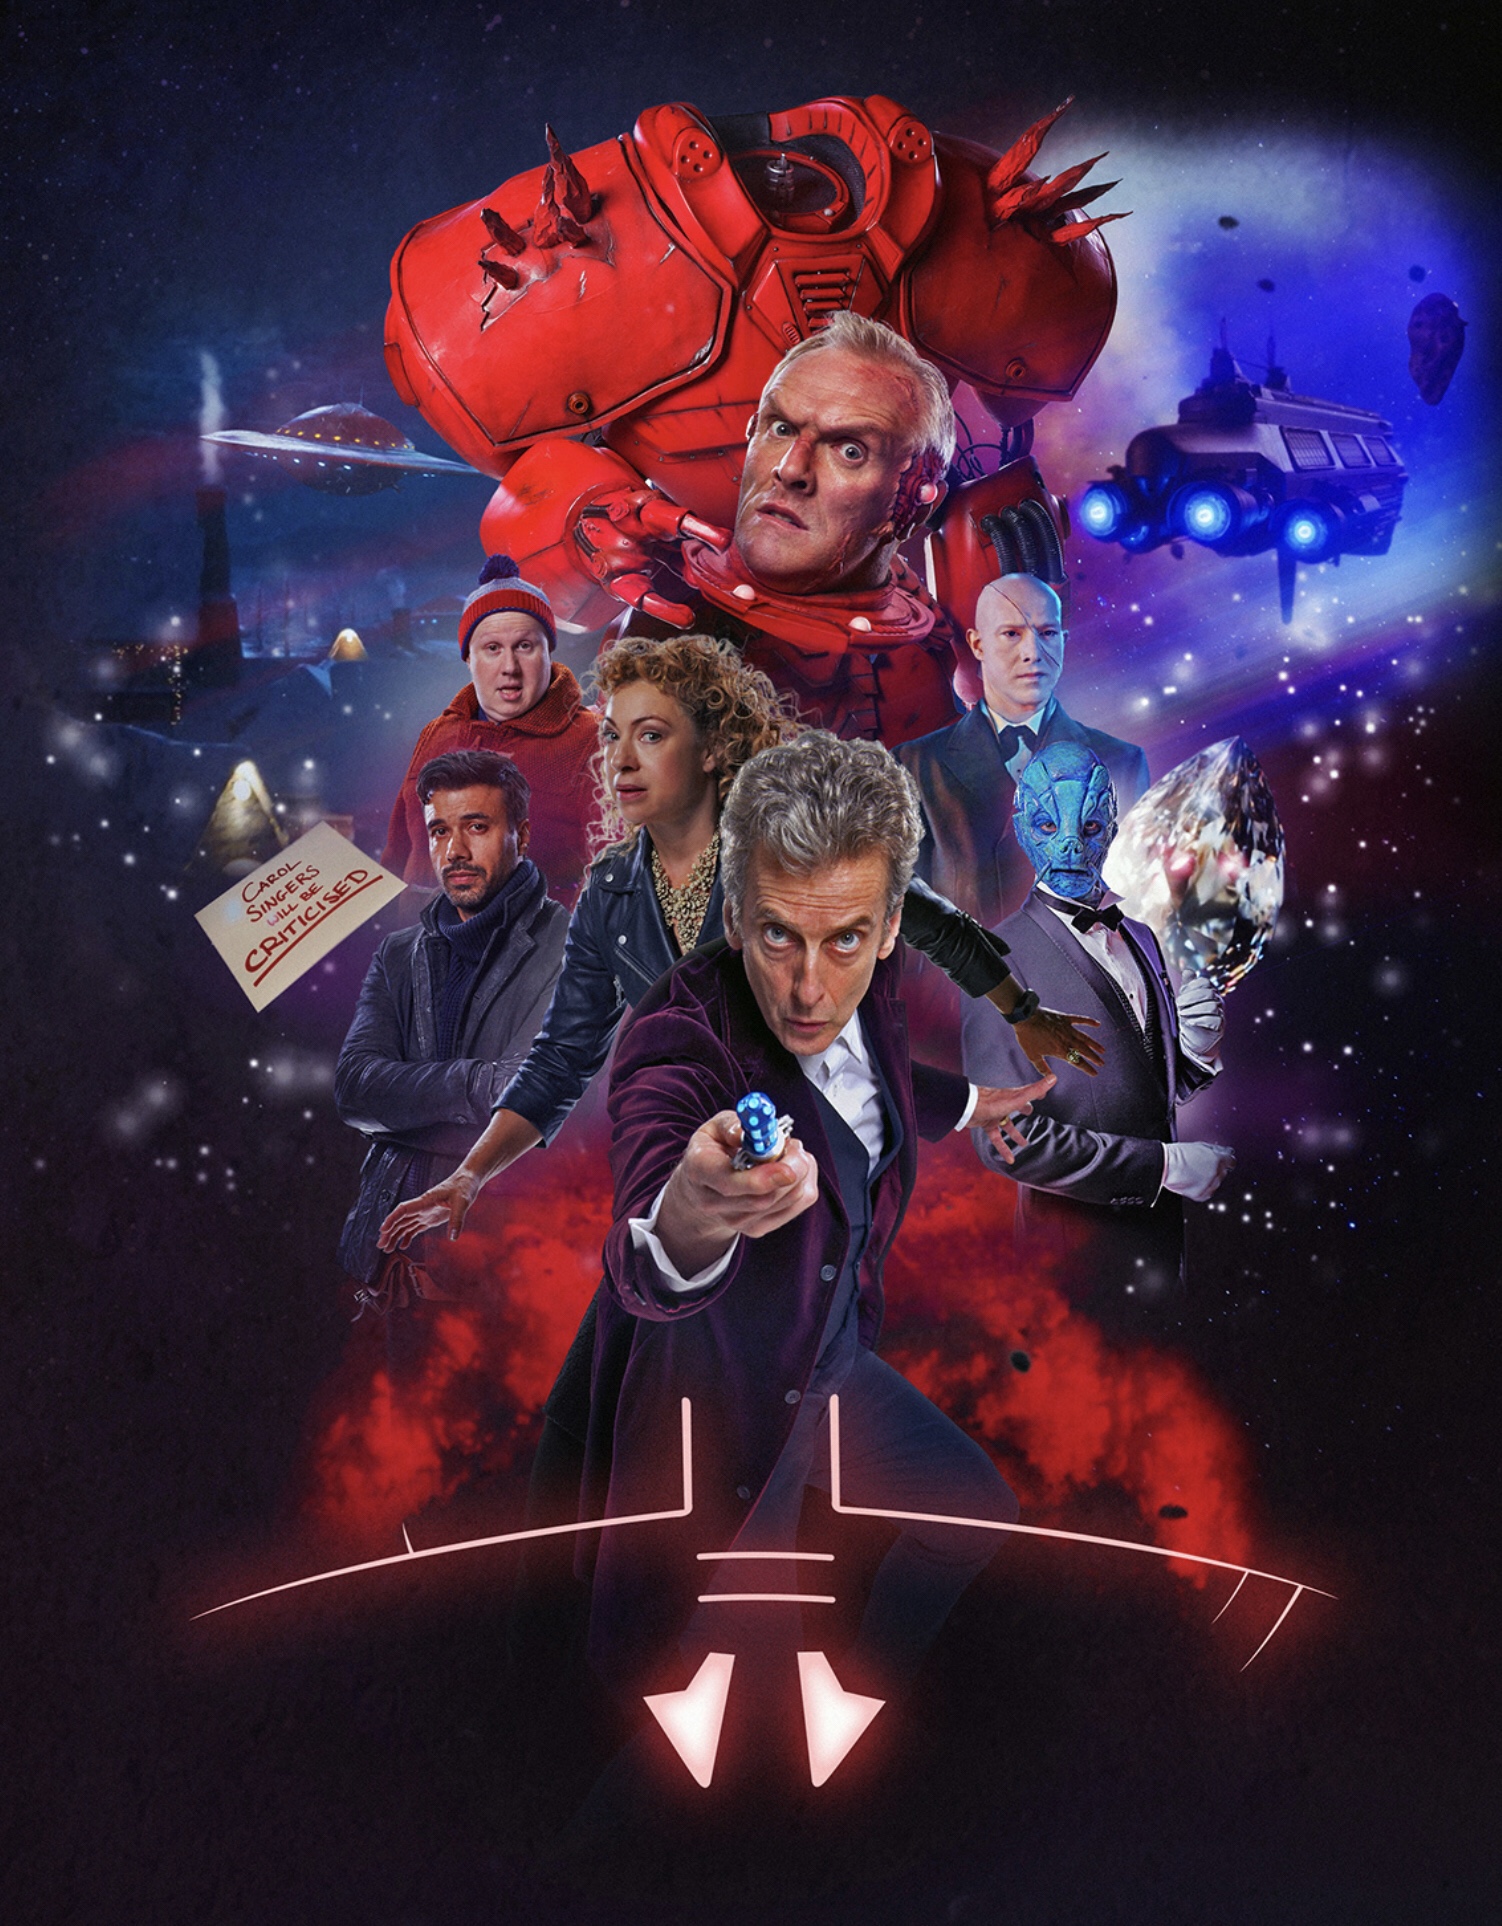 Doctor Who art by Lee Johnson